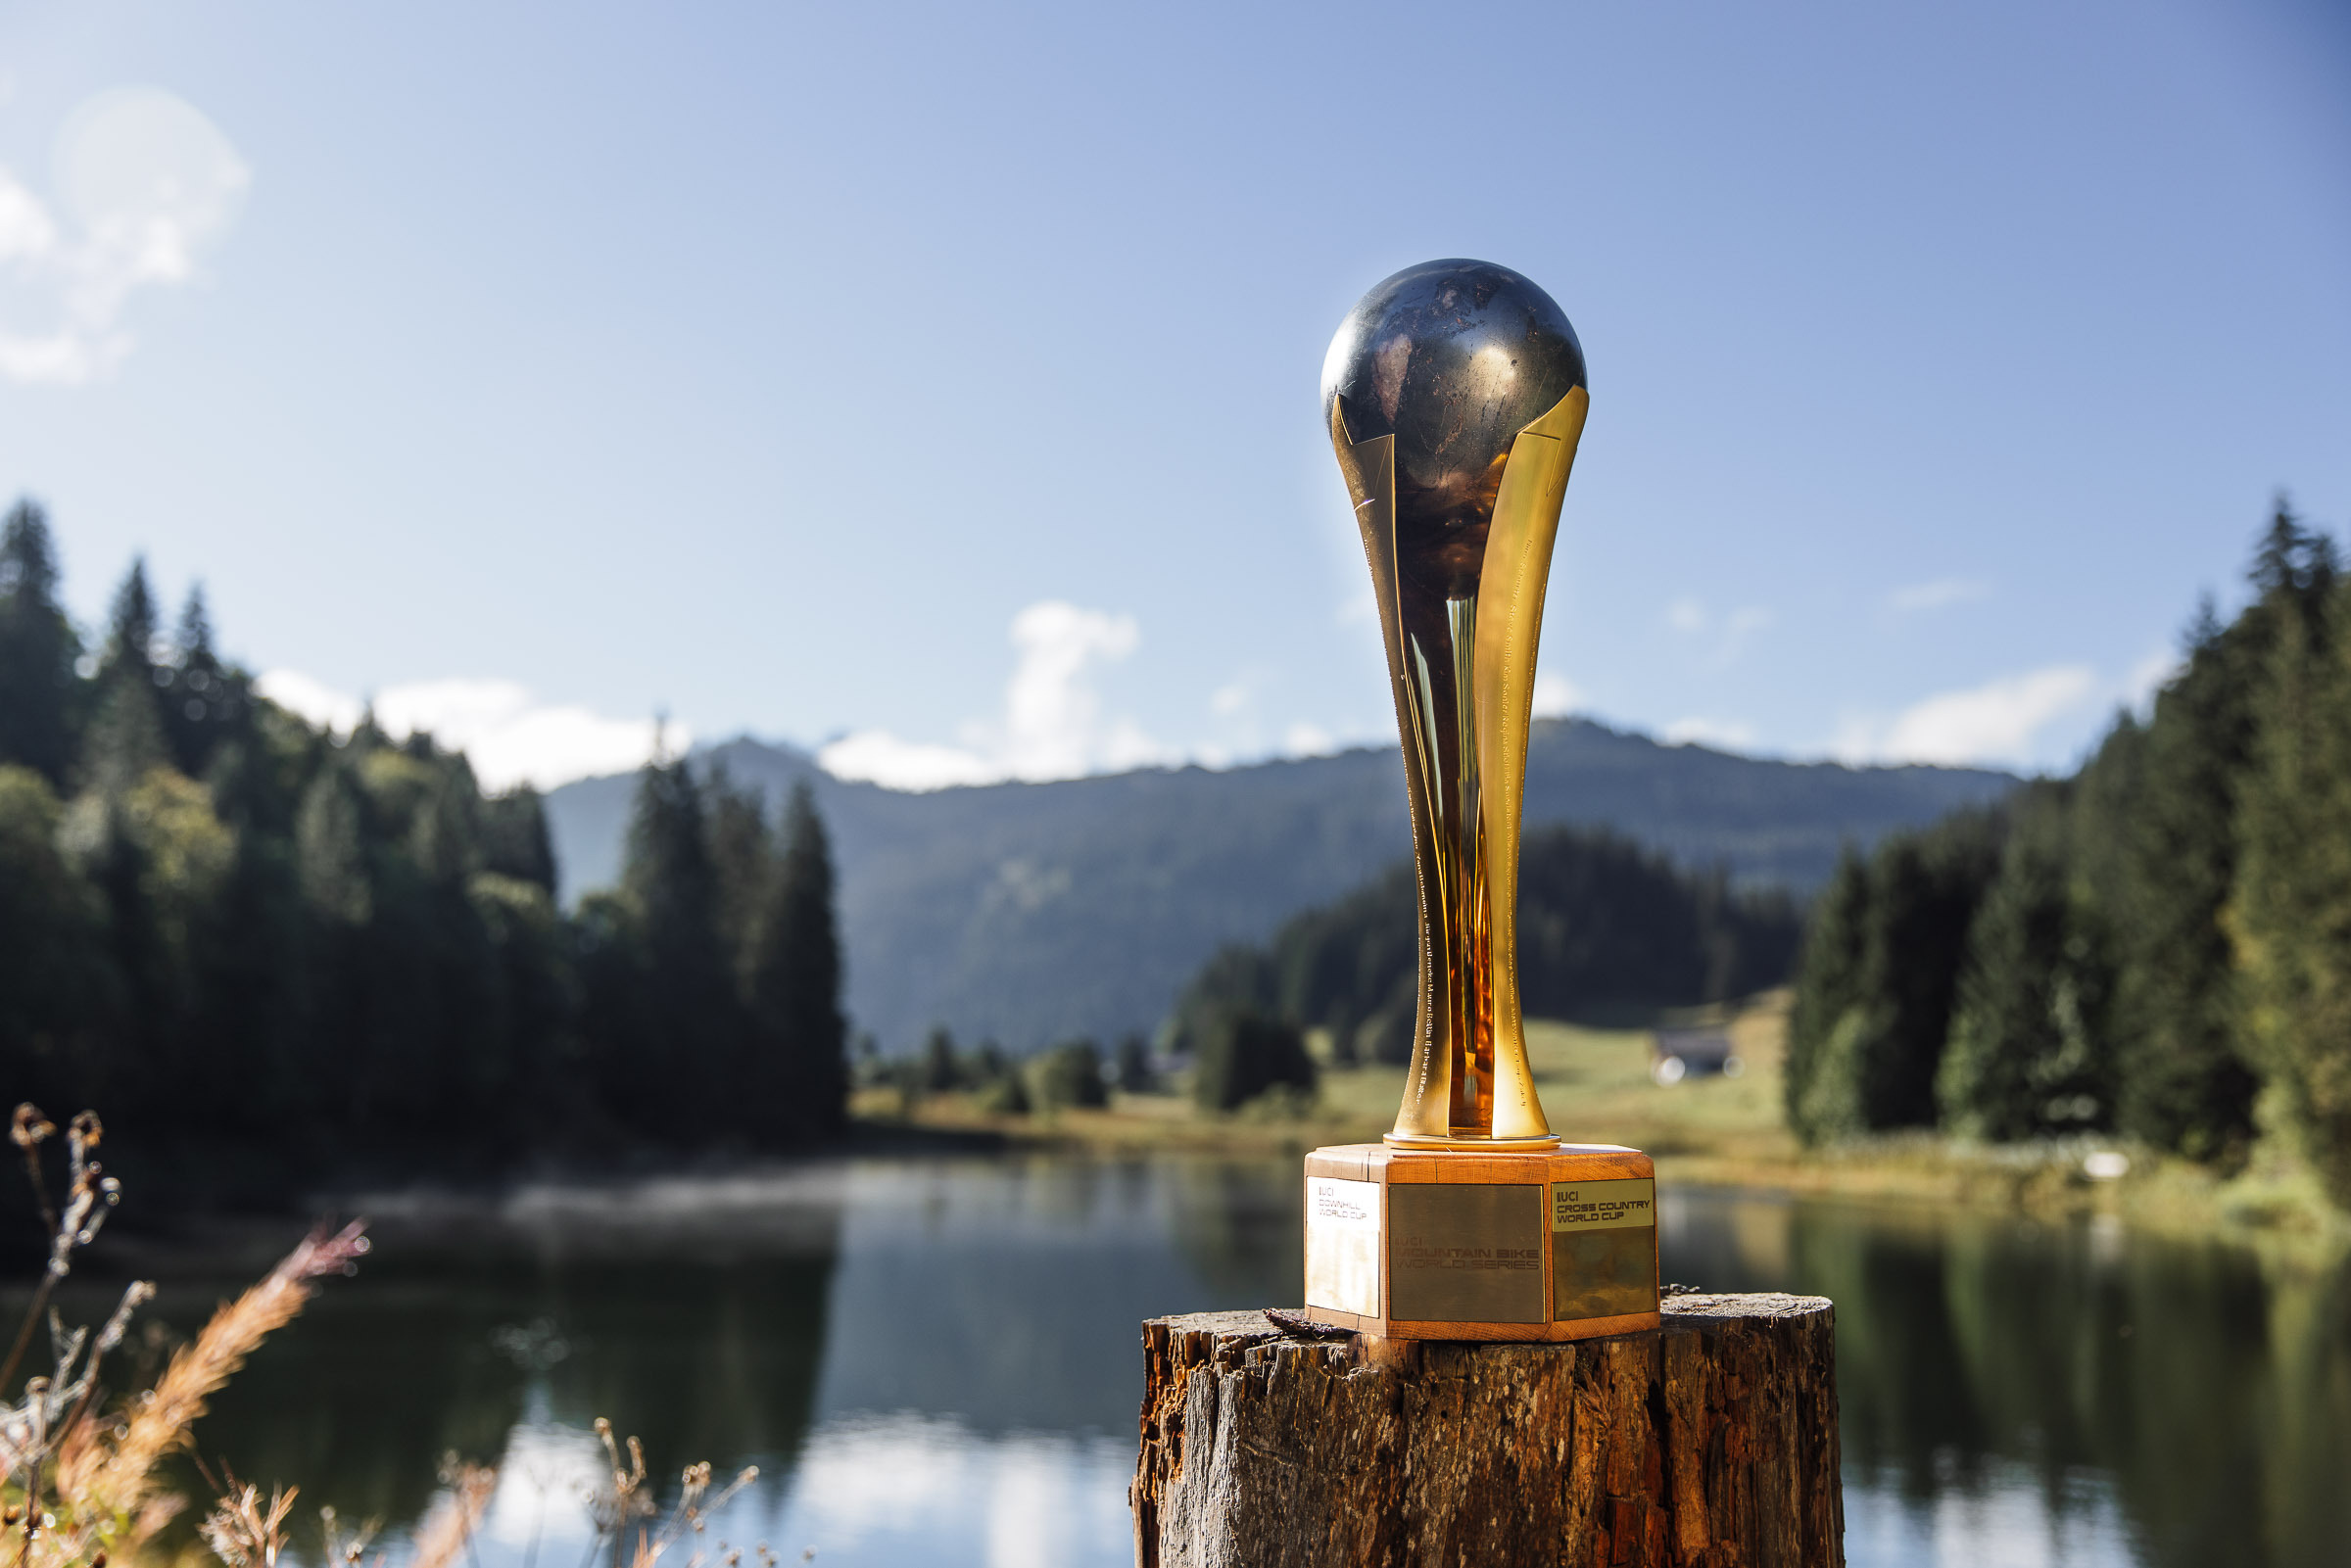 The new UCI Mountain Bike World Cup Overall Trophy is here